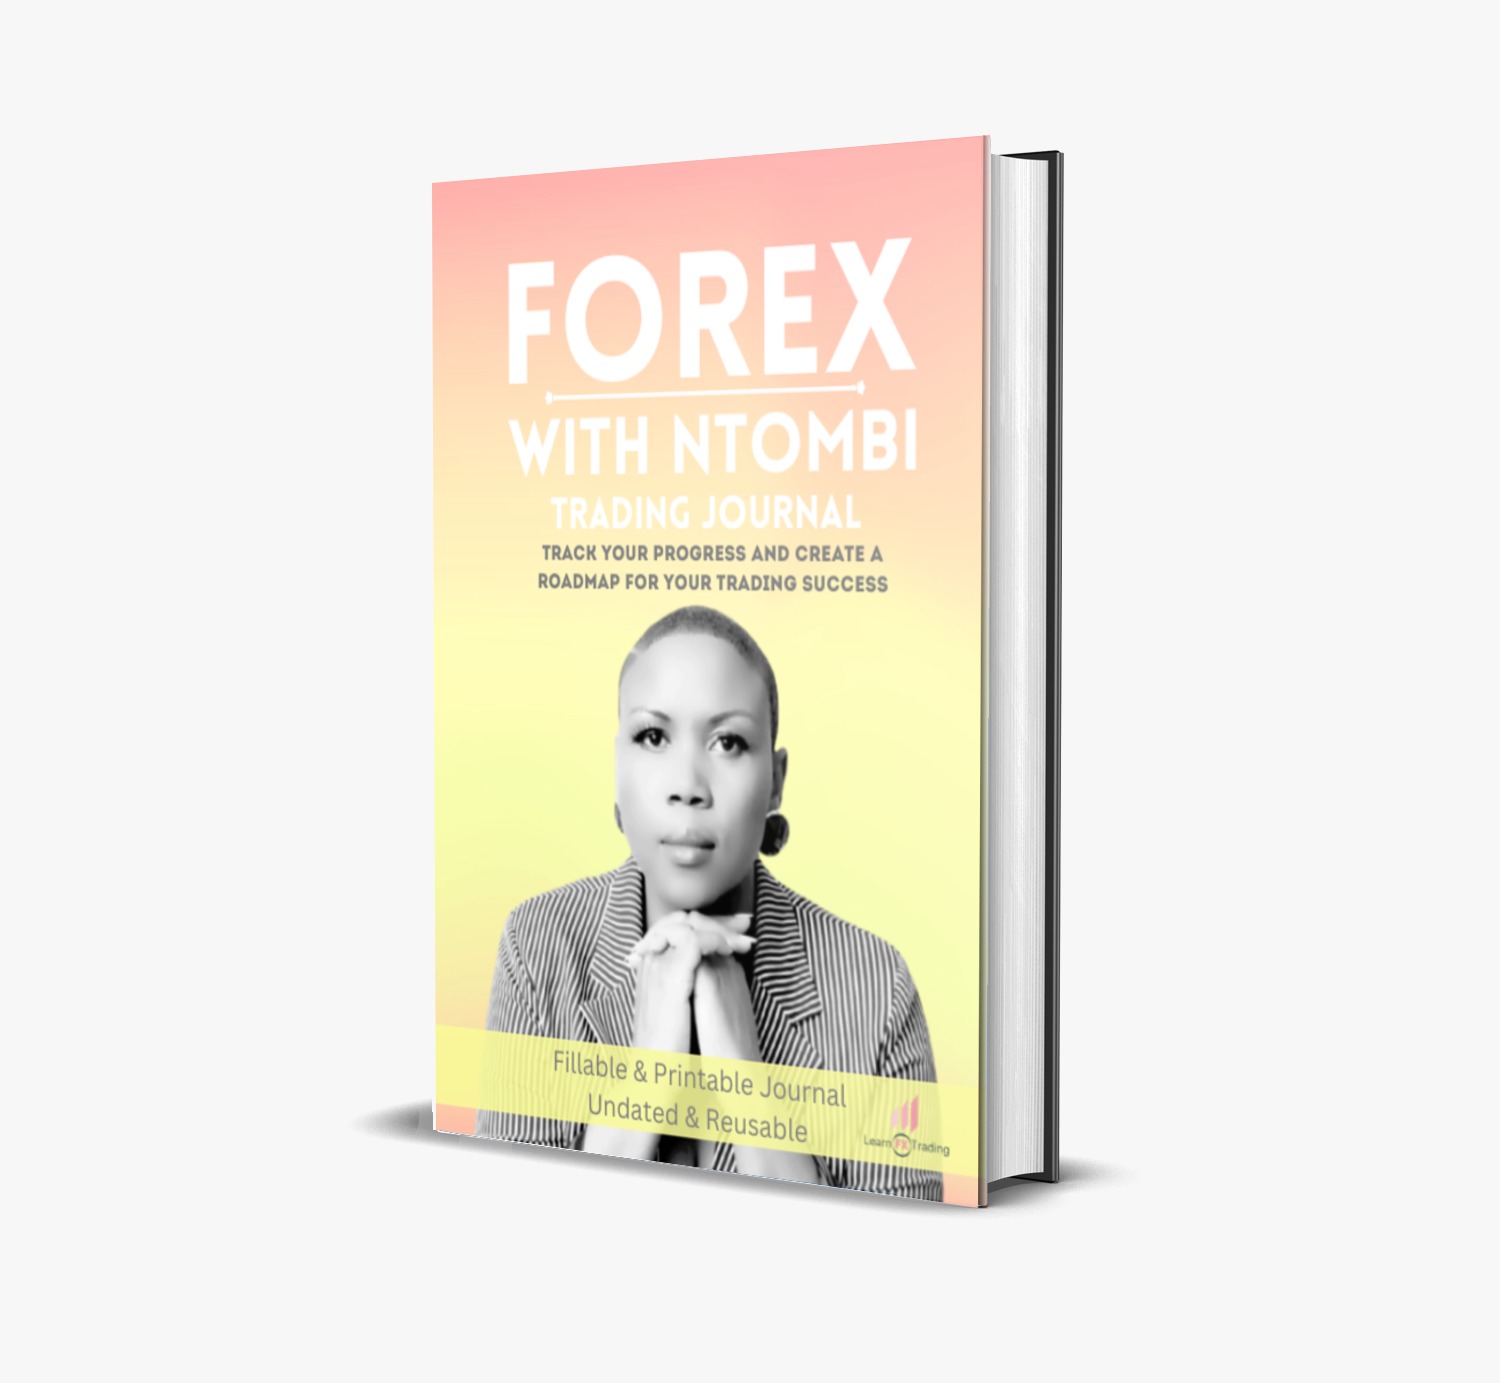 Forex with ntombi JOurnal